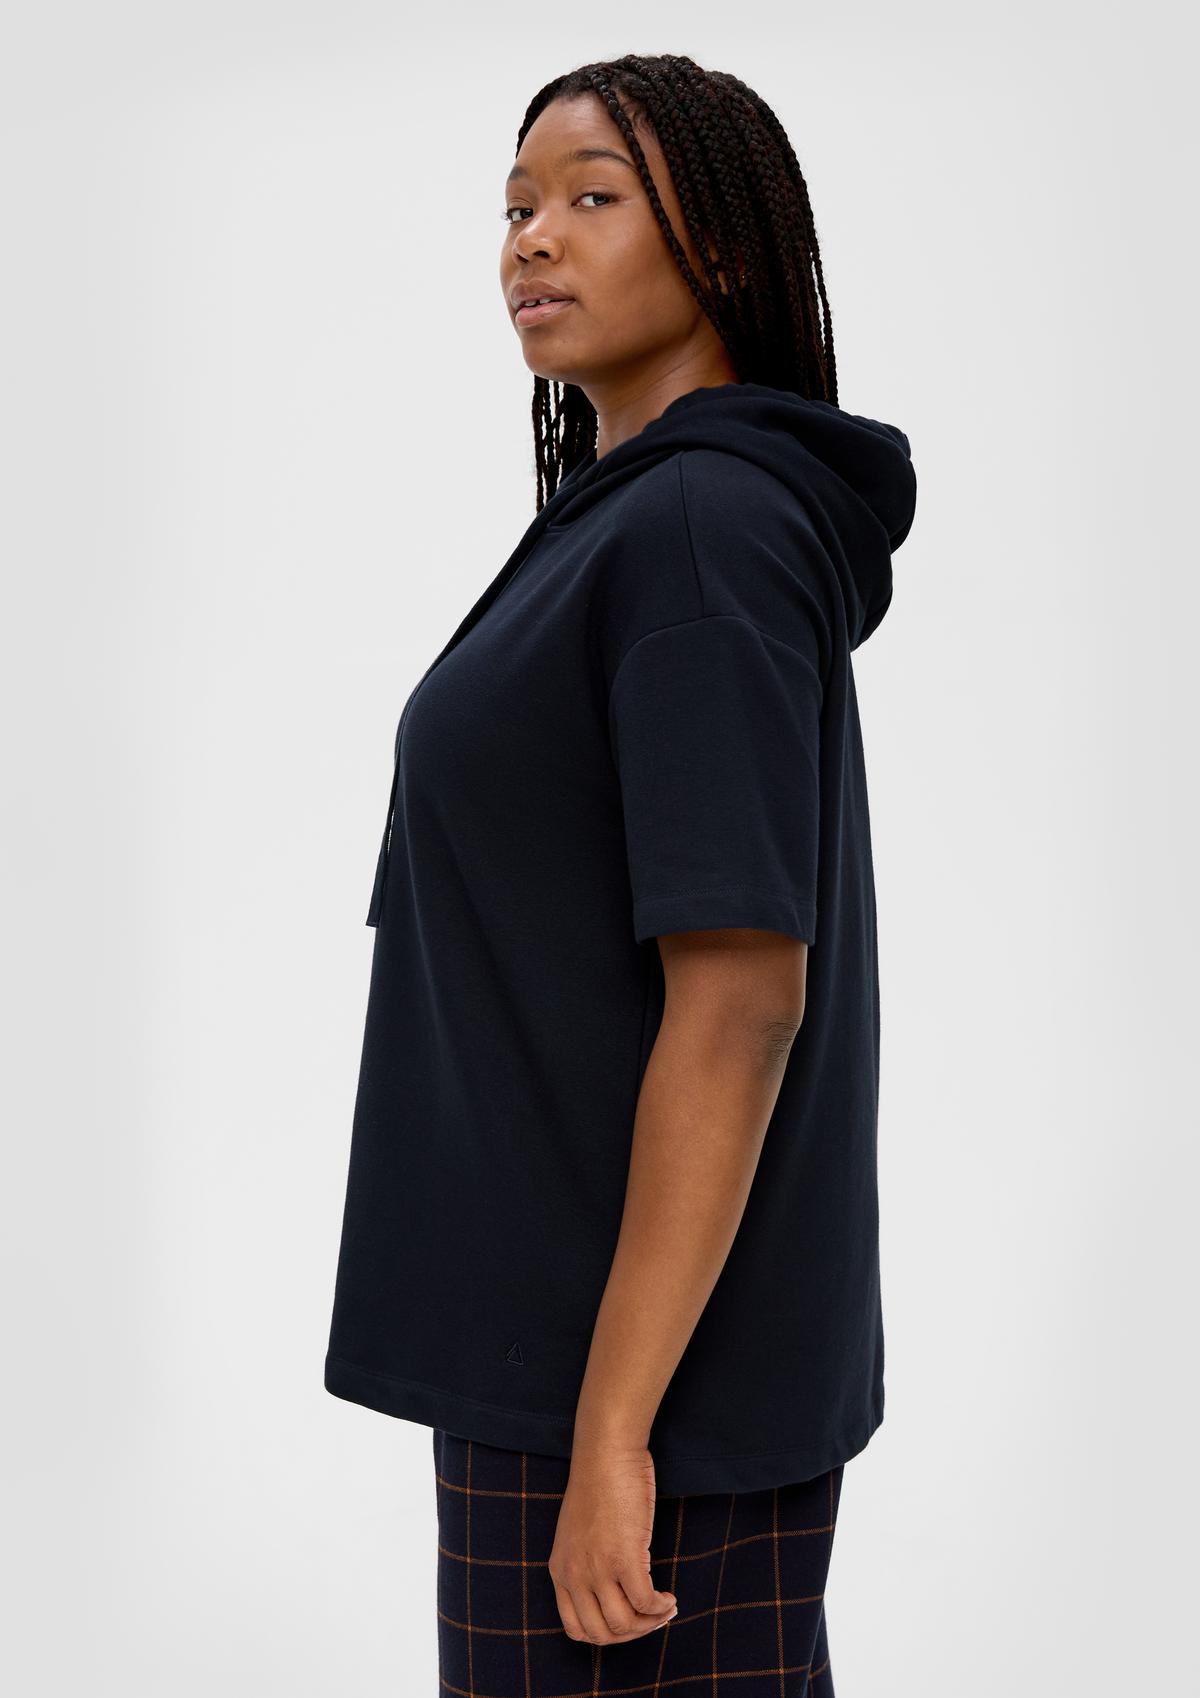 s.Oliver Hooded sweatshirt with short sleeves